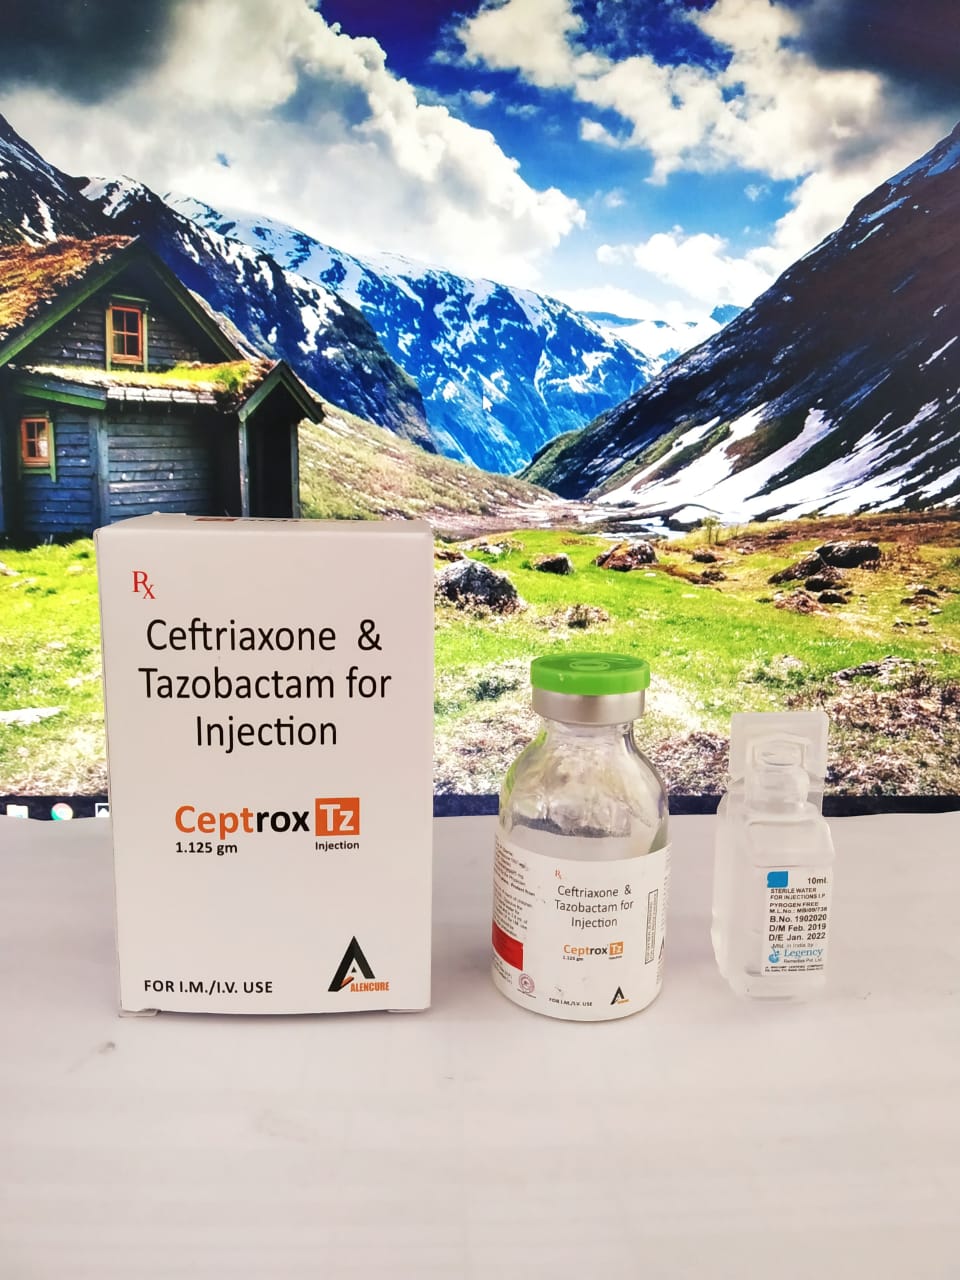 Product Name: CEPTROX TZ, Compositions of CEPTROX TZ are Ceftriaxone & Tazobactam For Injection - Alencure Biotech Pvt Ltd